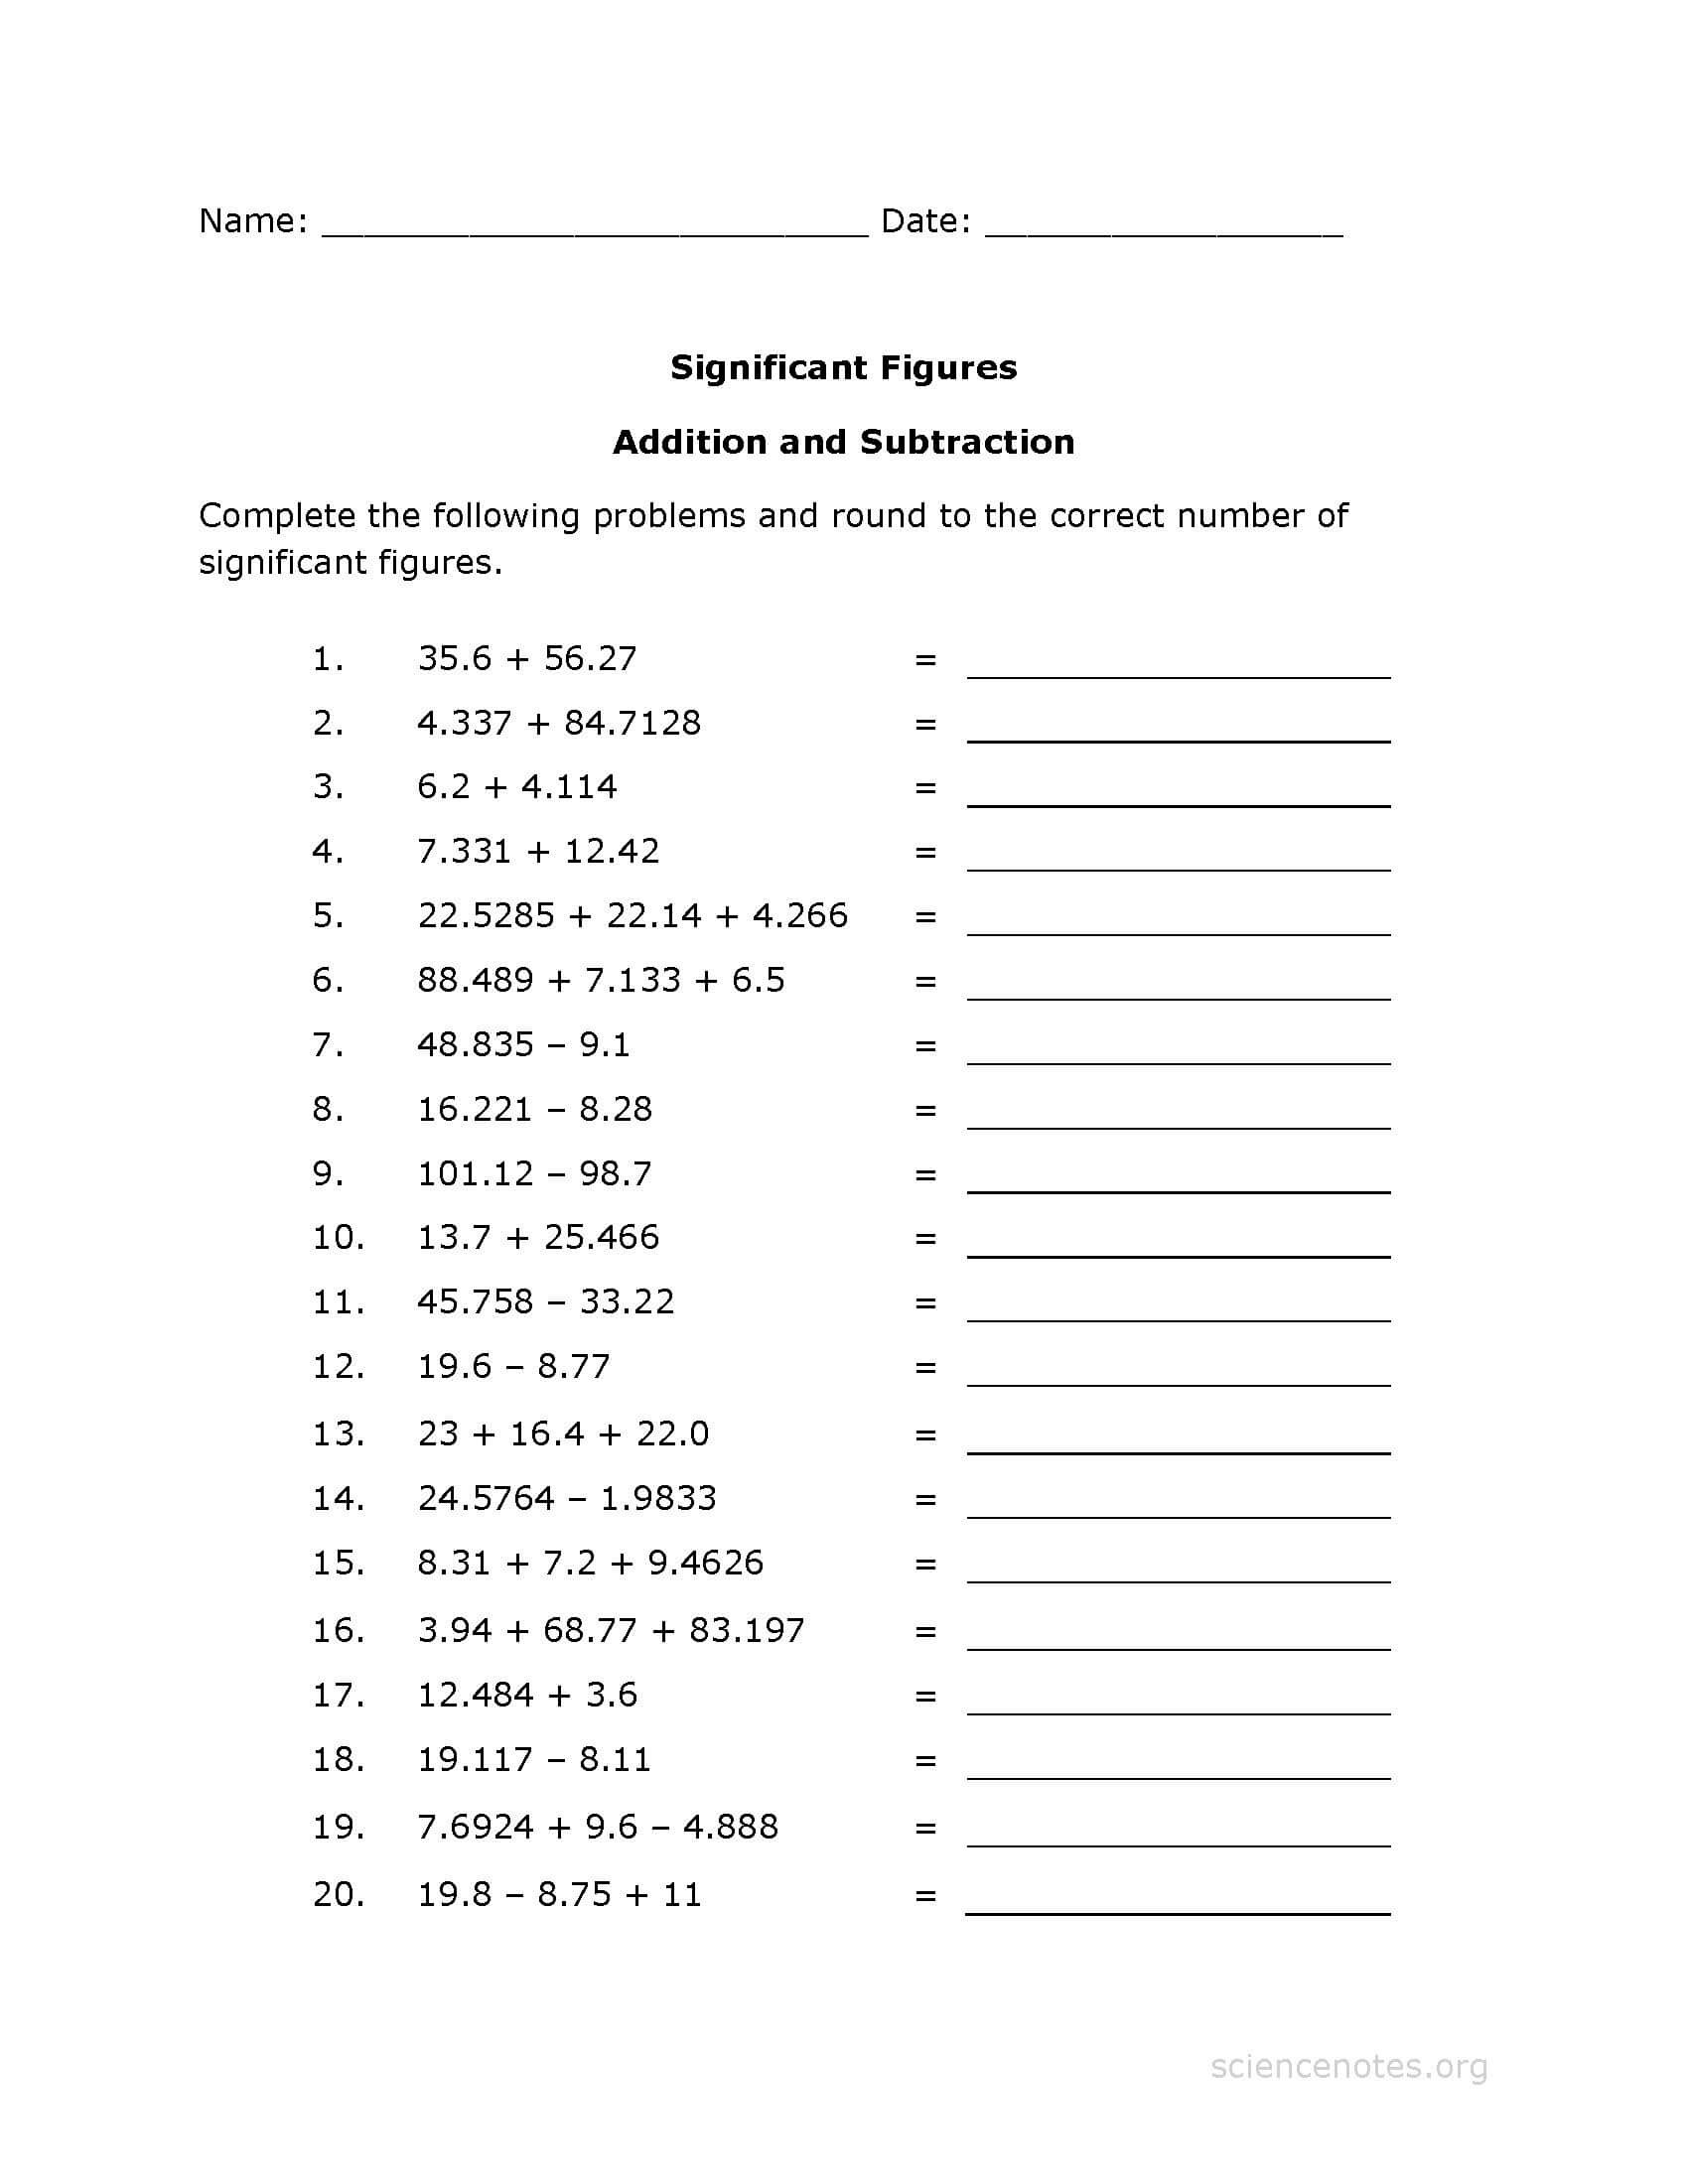 Significant Figures Worksheet Answers Significant Figures Worksheet Pdf Addition Practice